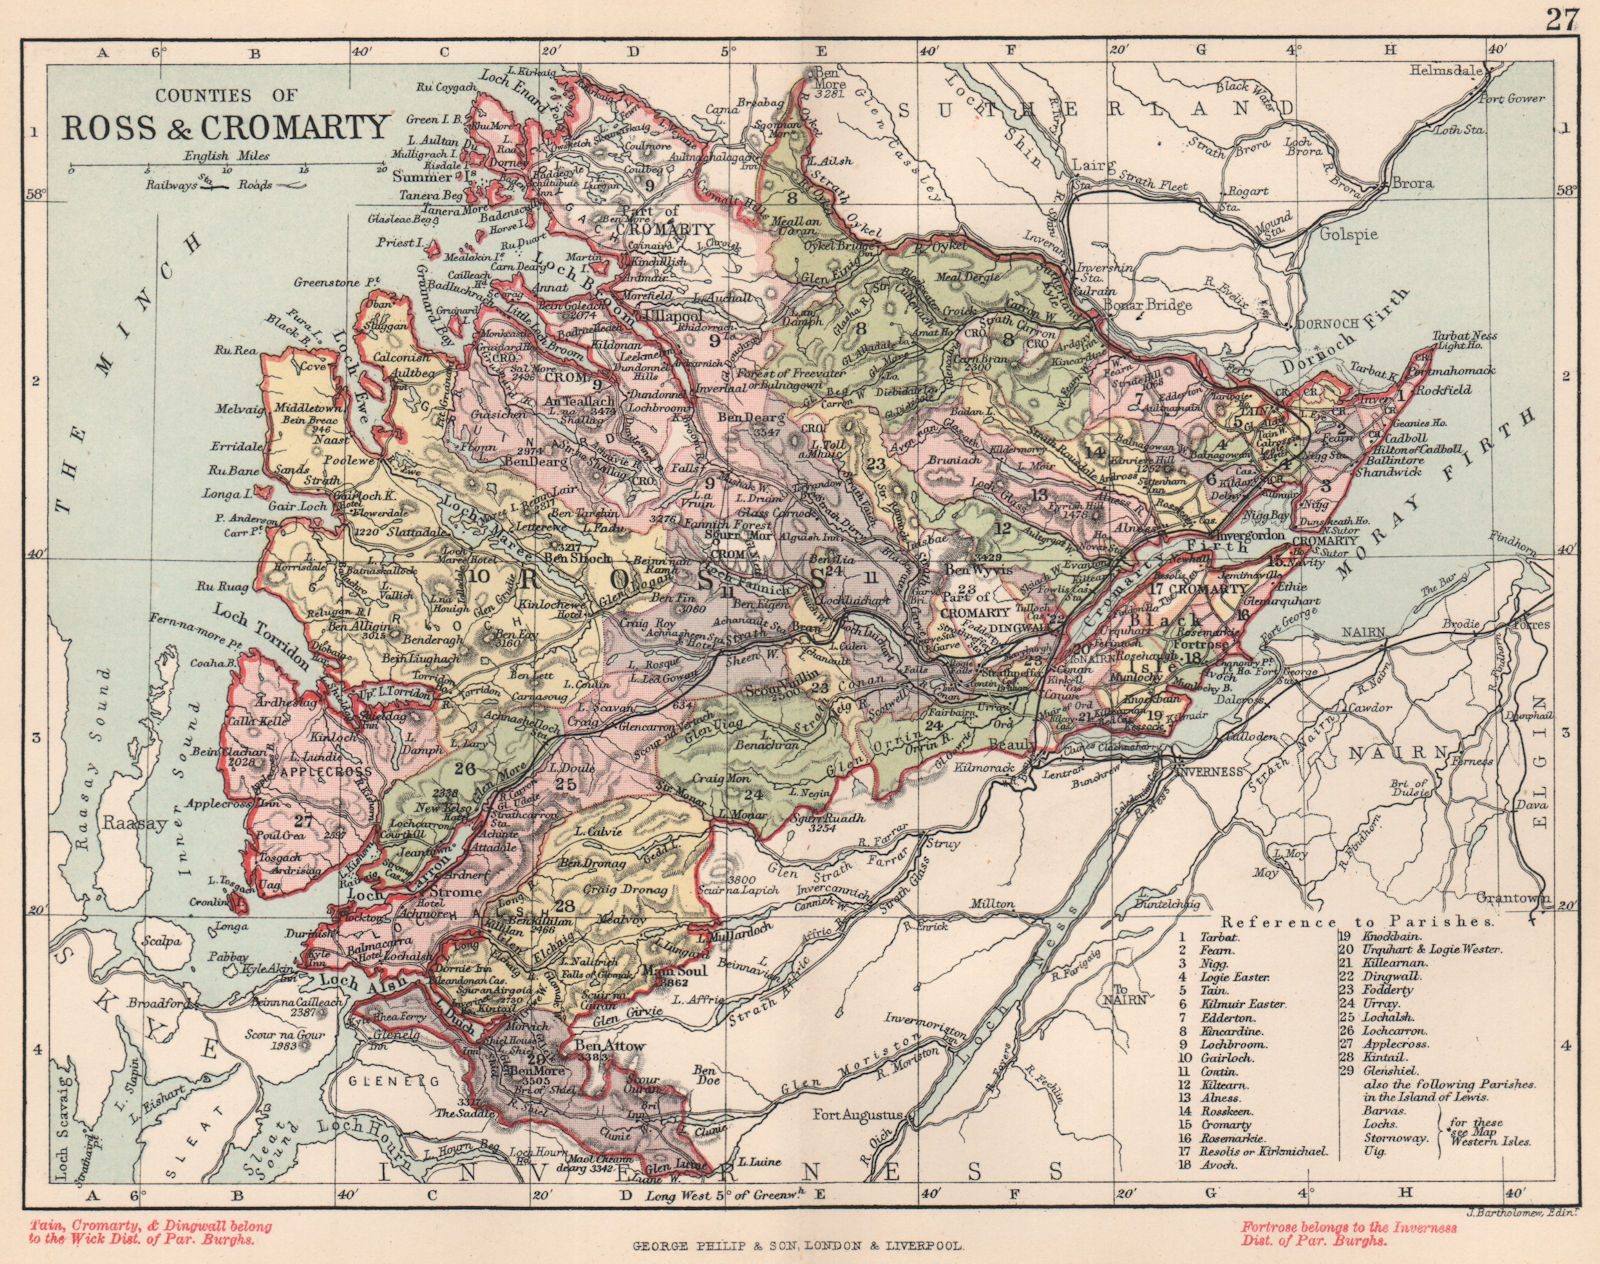 'Counties of Ross & Cromarty'. Ross-shire & Cromartyshire. BARTHOLOMEW 1891 map